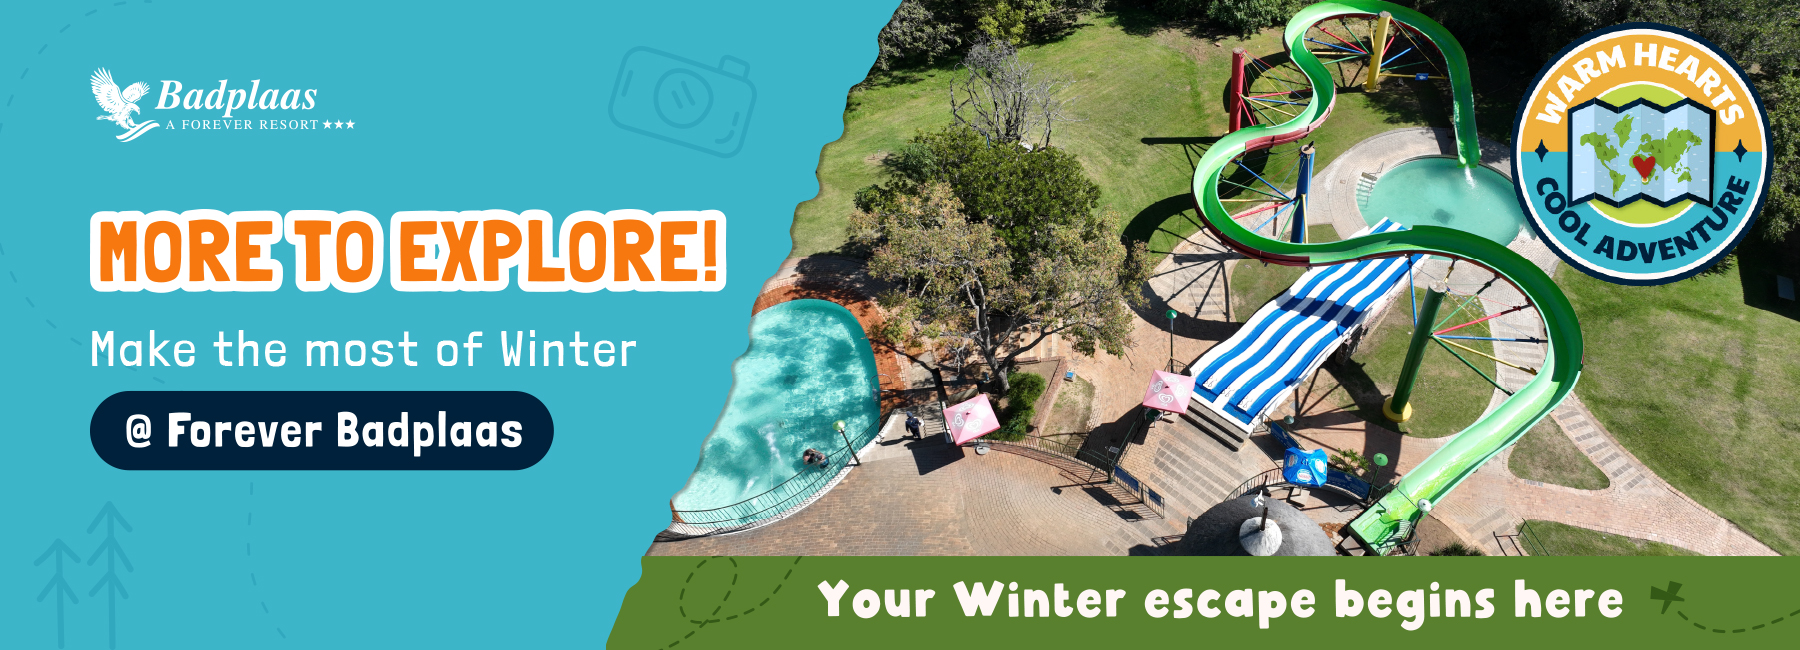 More to explore! Make the most of Winter at Badplaas.